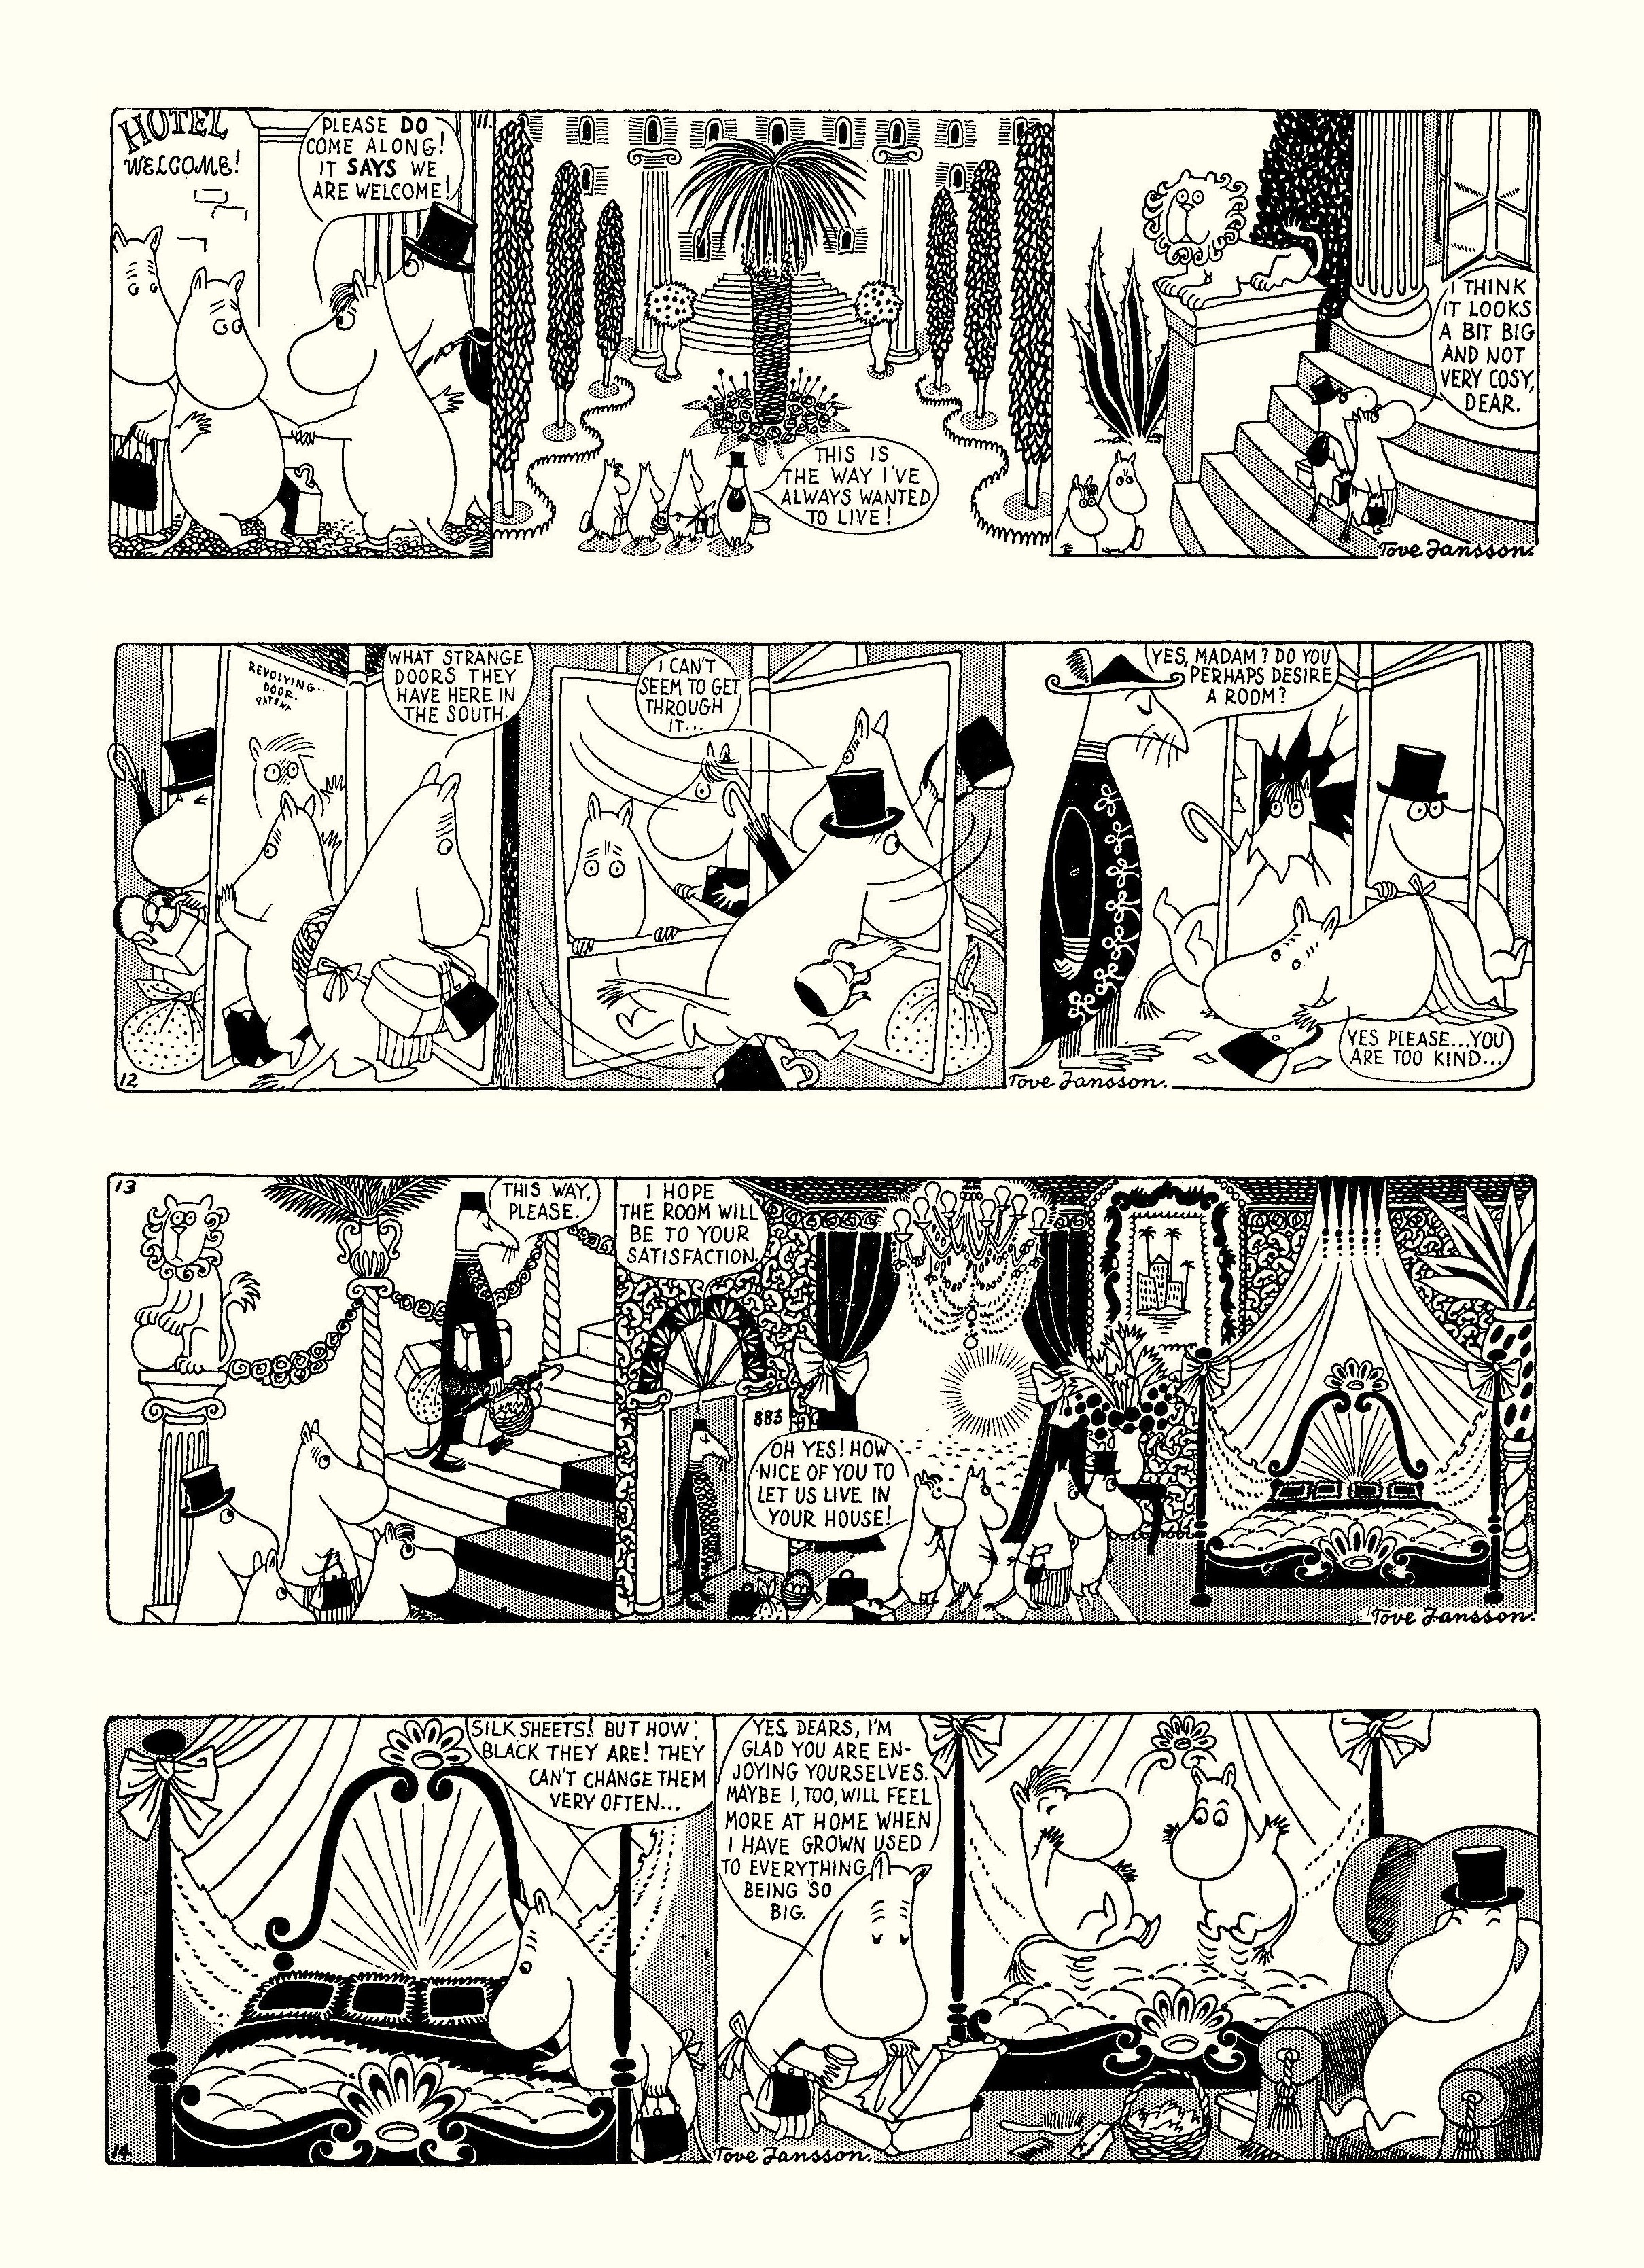 Read online Moomin: The Complete Tove Jansson Comic Strip comic -  Issue # TPB 1 - 51